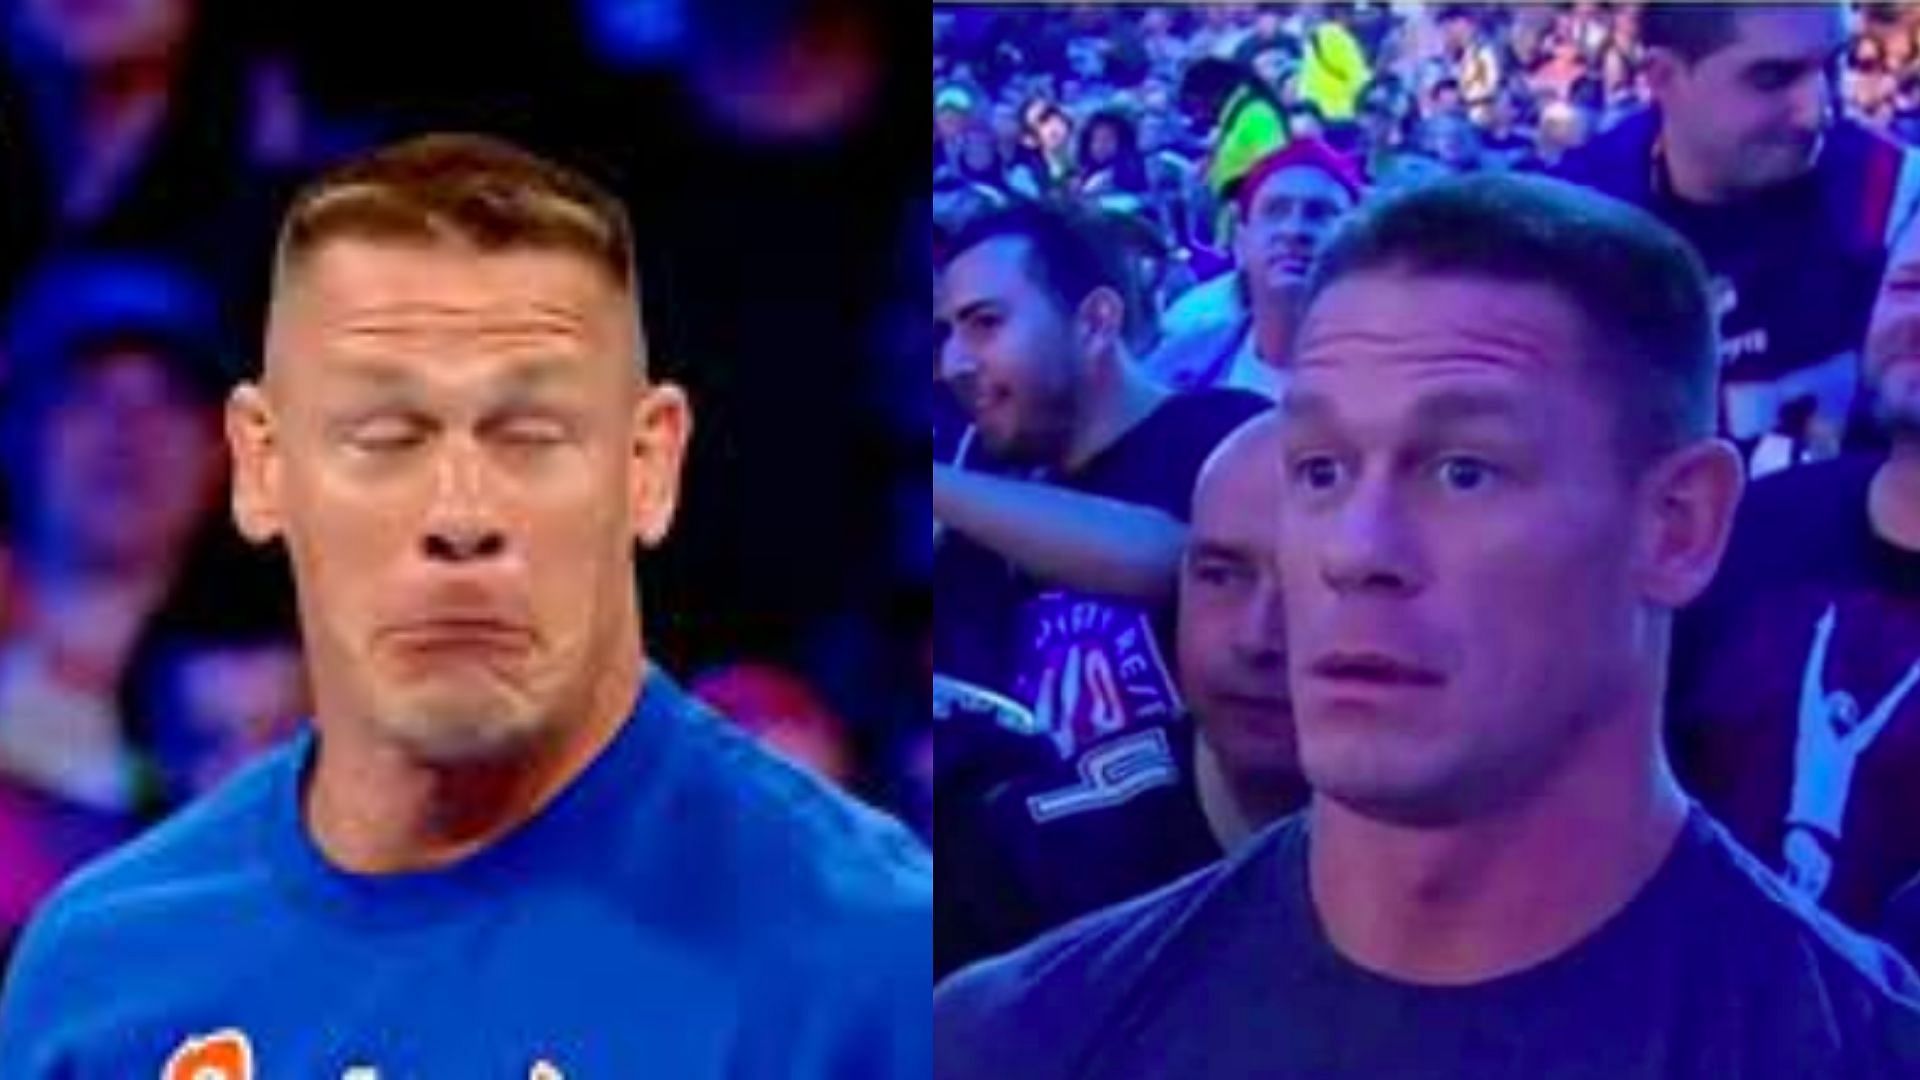 John Cena has been in the middle of one of his longer runs in WWE